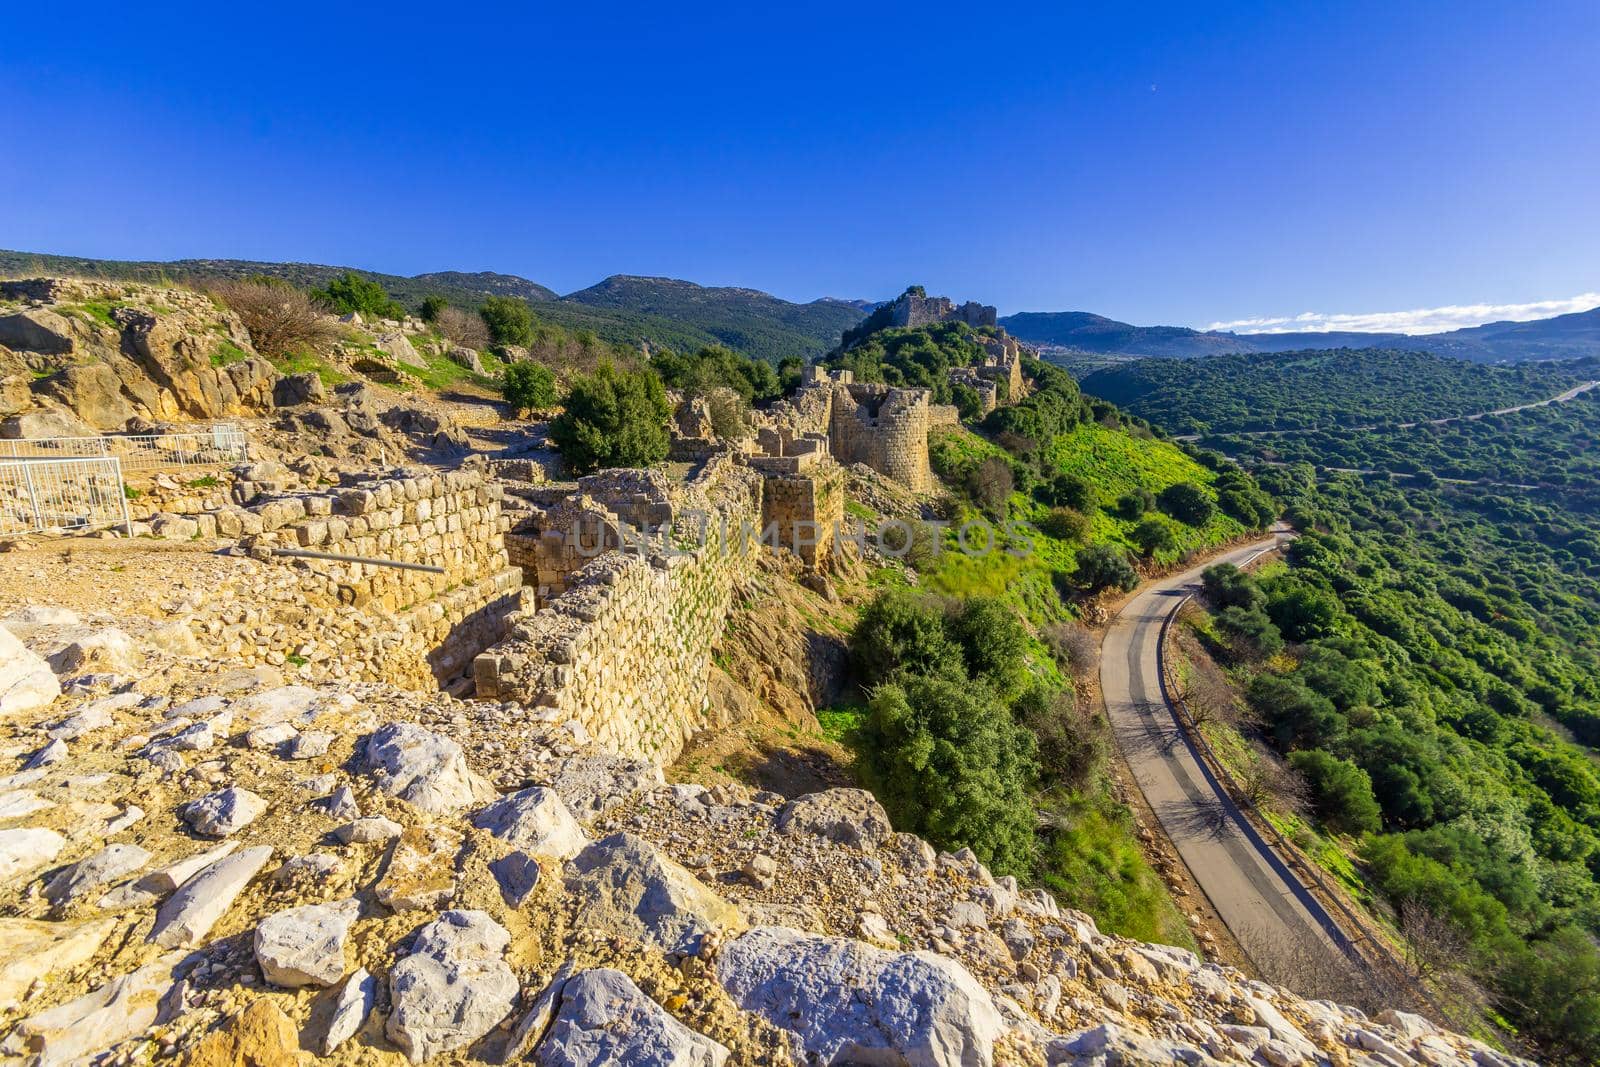 View of the Medieval Nimrod Fortress and nearby landscape, in the Golan Heights, Northern Israel